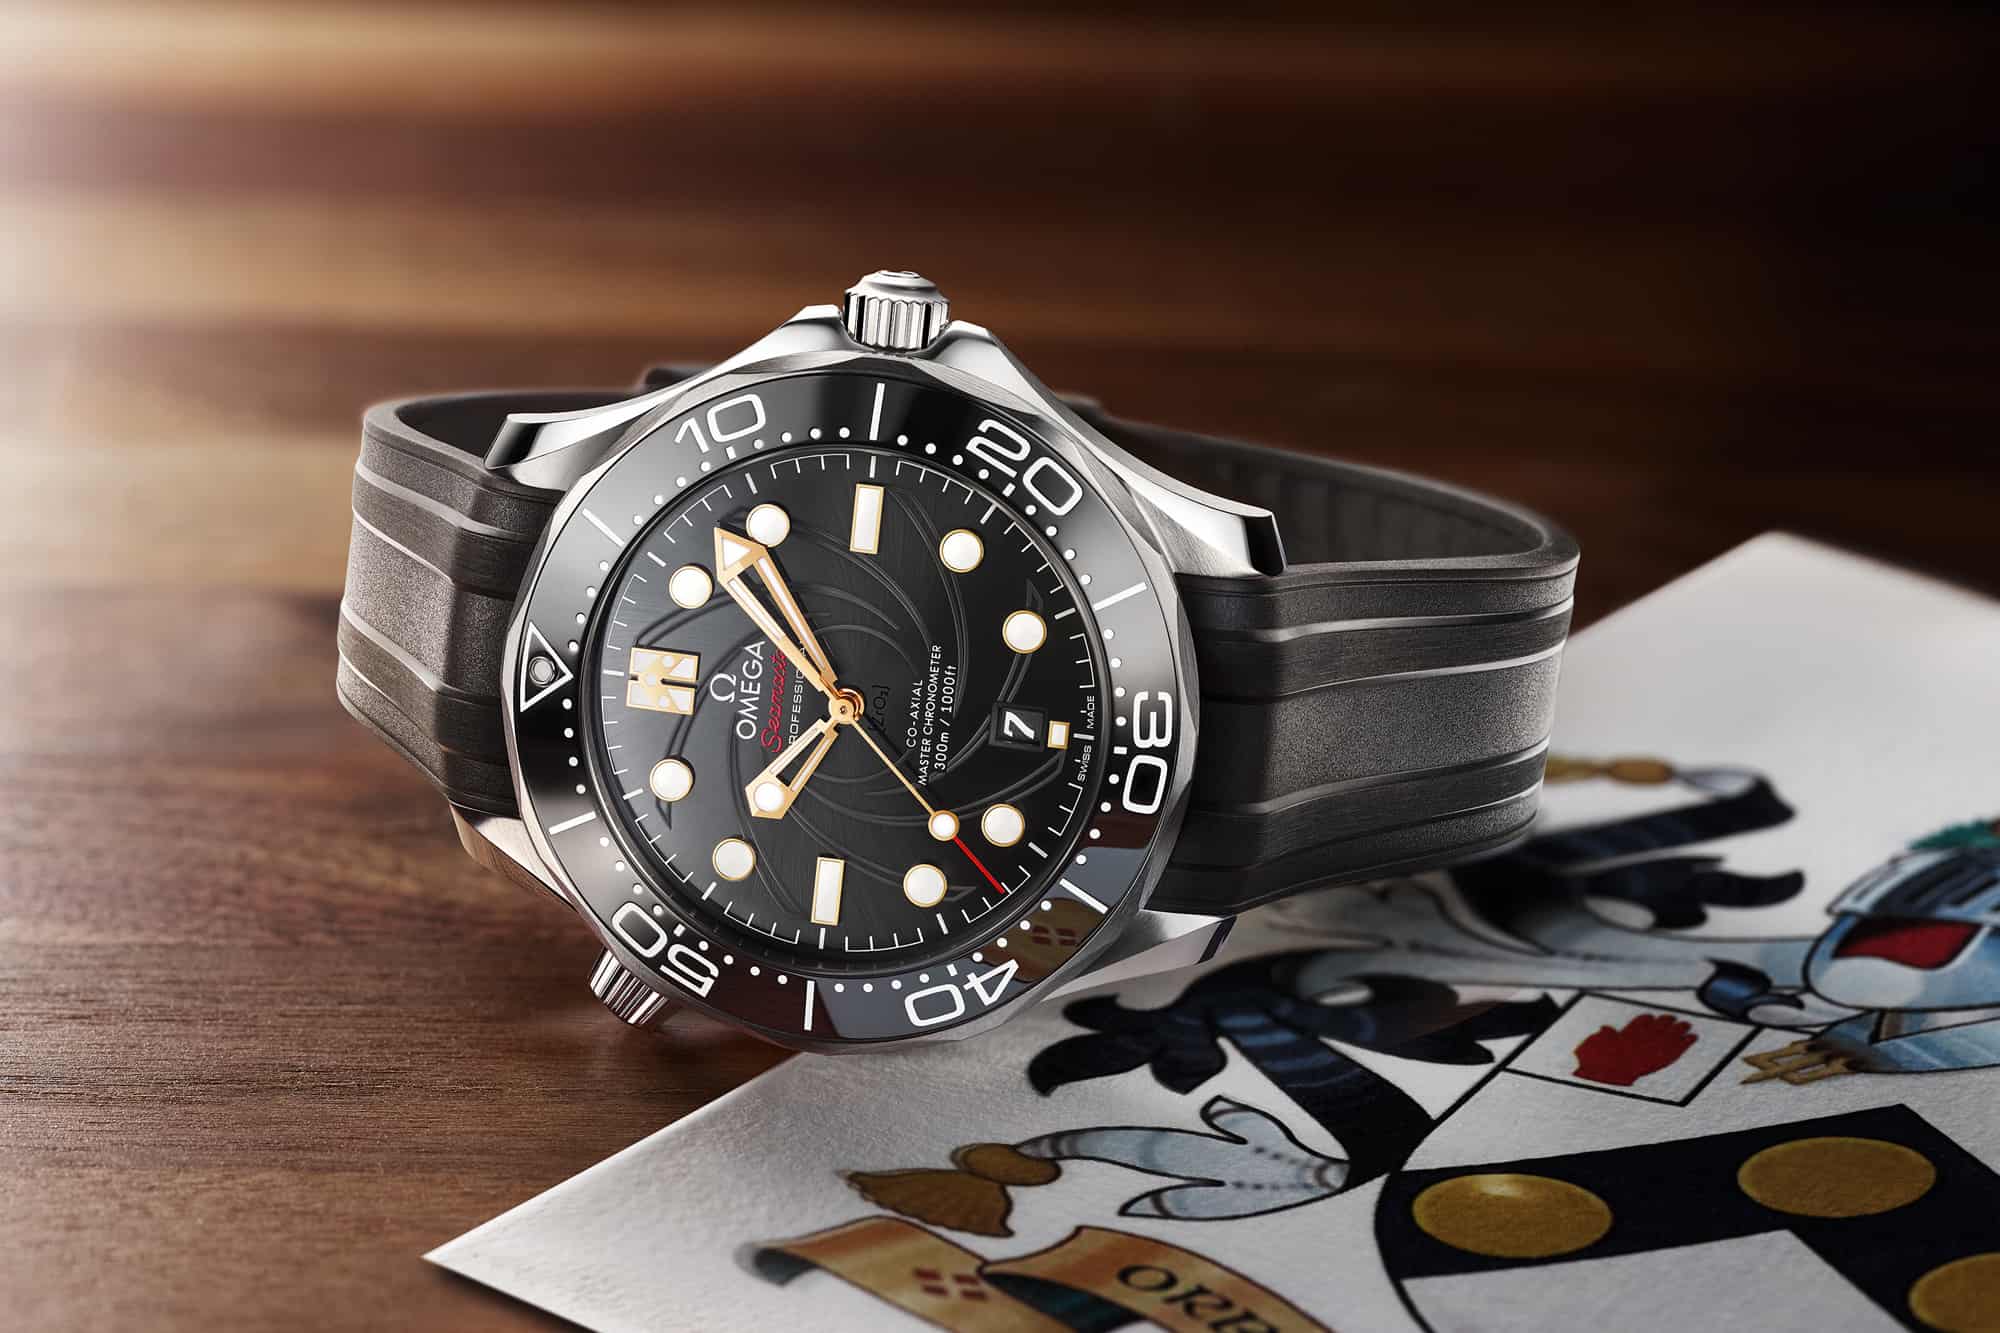 Introducing the Omega Seamaster Diver 300M: James Bond Limited Edition